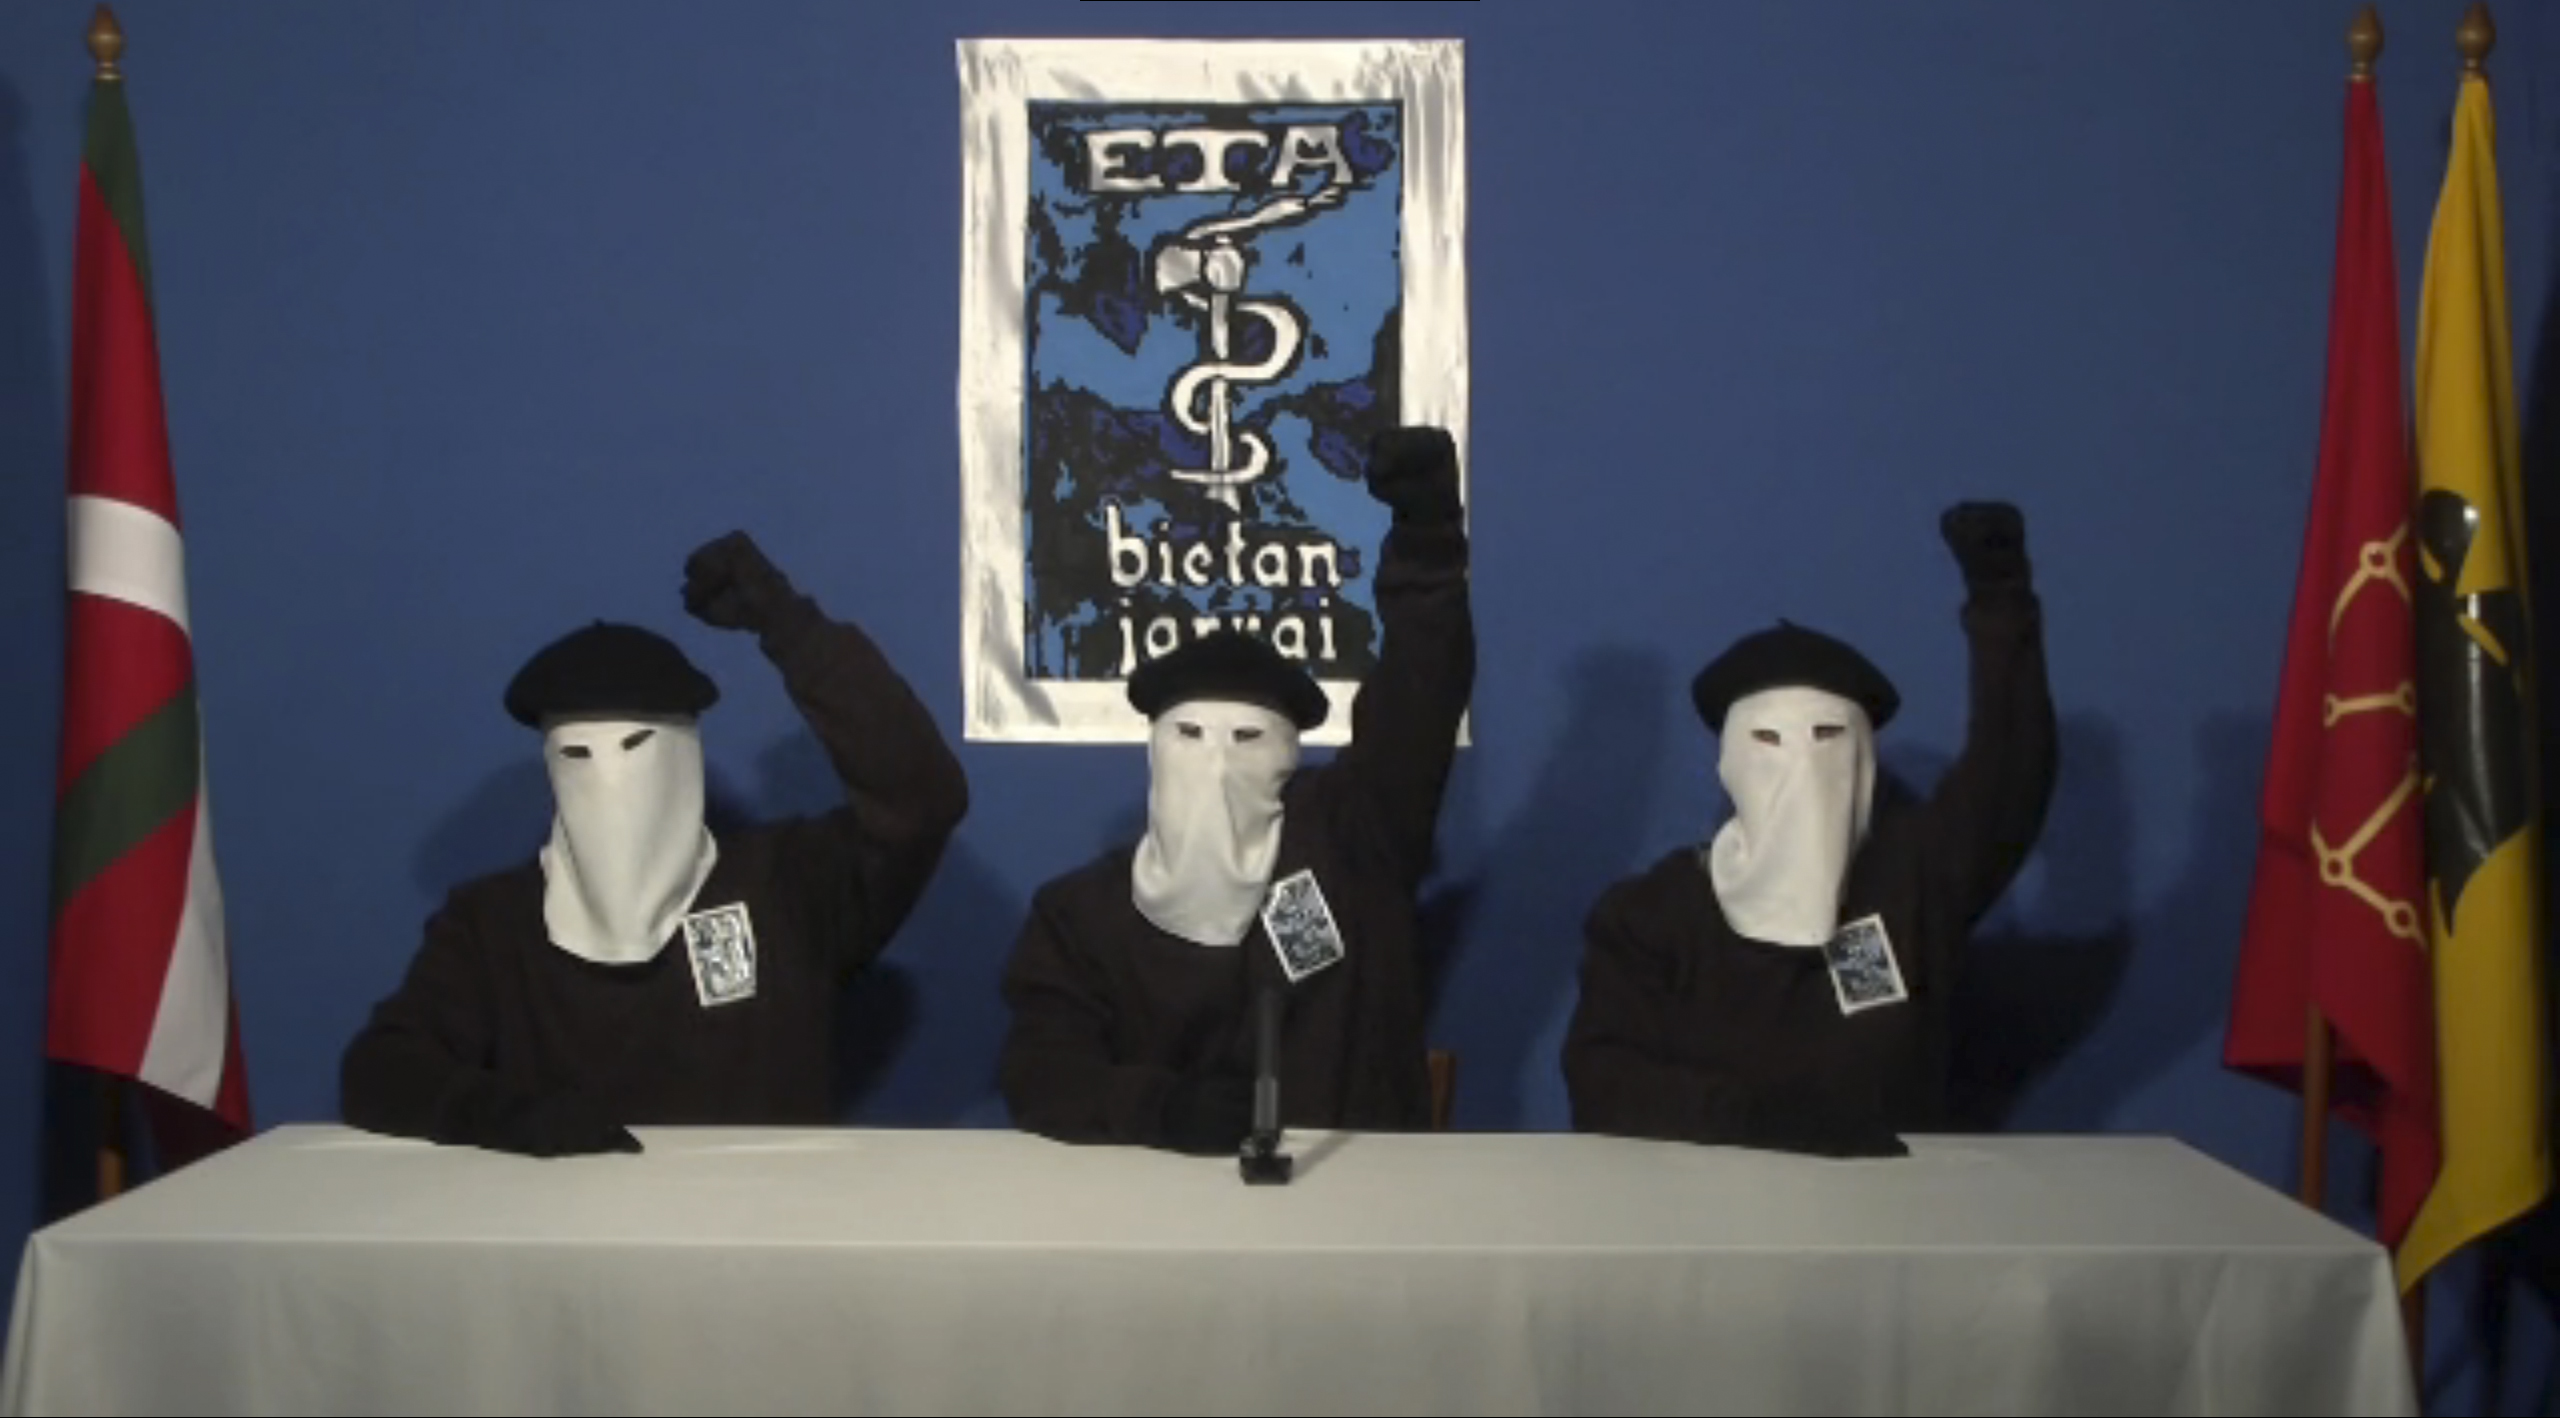 Three members of Basque separatist group ETA call a definitive end to fifty years of armed struggle, which has resulted in at least 850 deaths, in this still image taken from an undated video published on the website of Basque language newspaper “Gara,” on October 20, 2011. Source: Gara via Reuters.